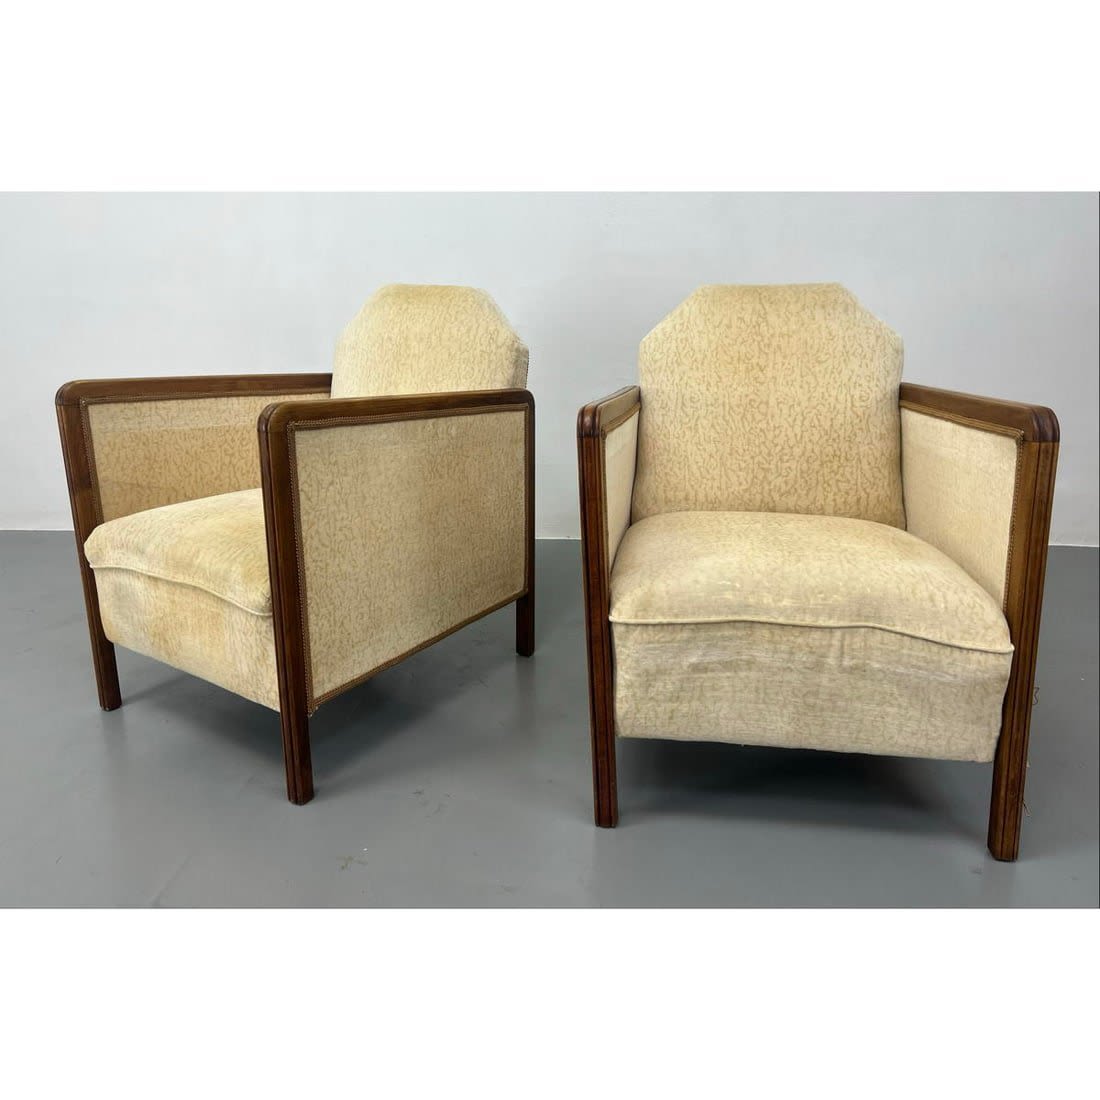 Pair French Art Deco Style Lounge 362ad7